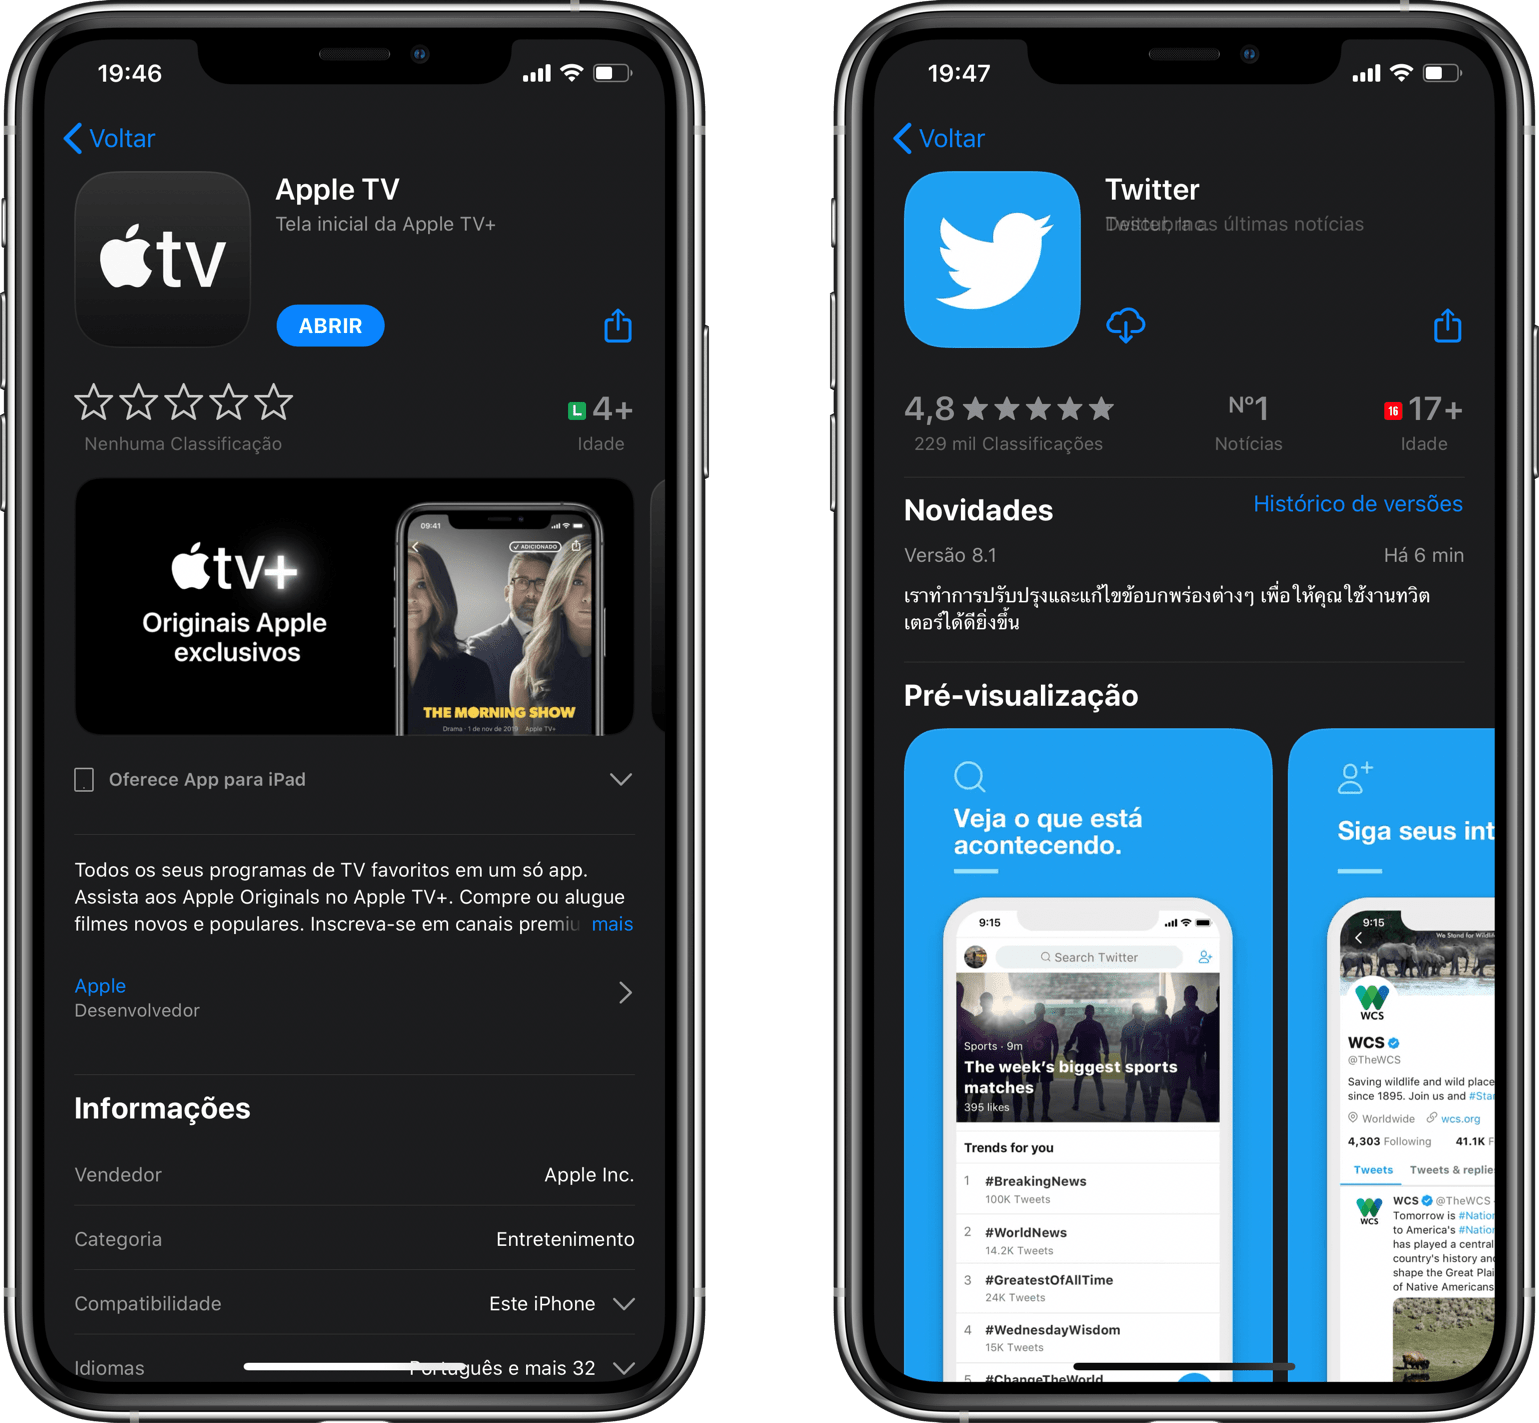 Apple TV + and Twitter apps age rating